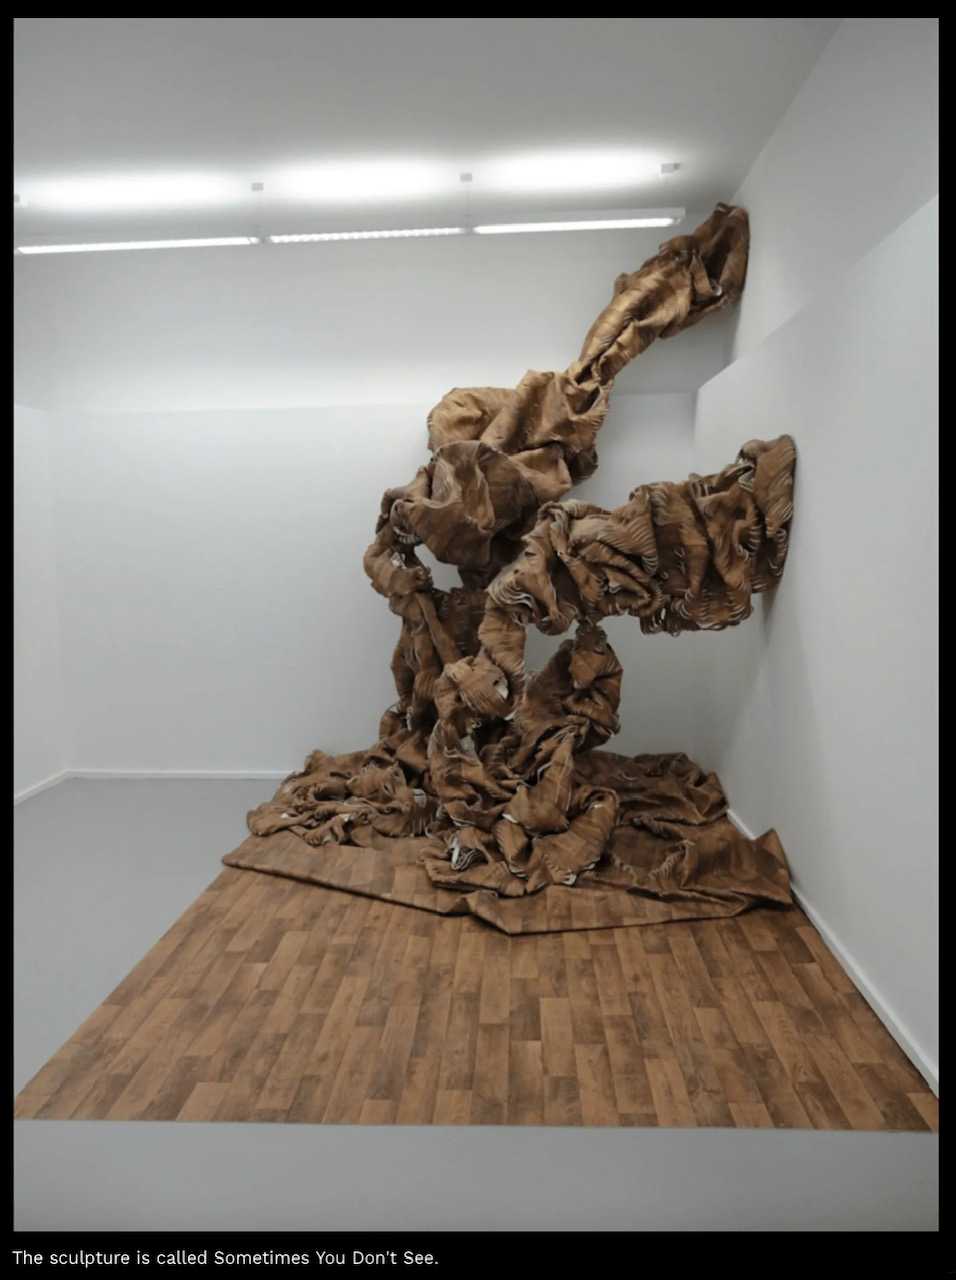 David Booth sculpture - Sometimes you don't see